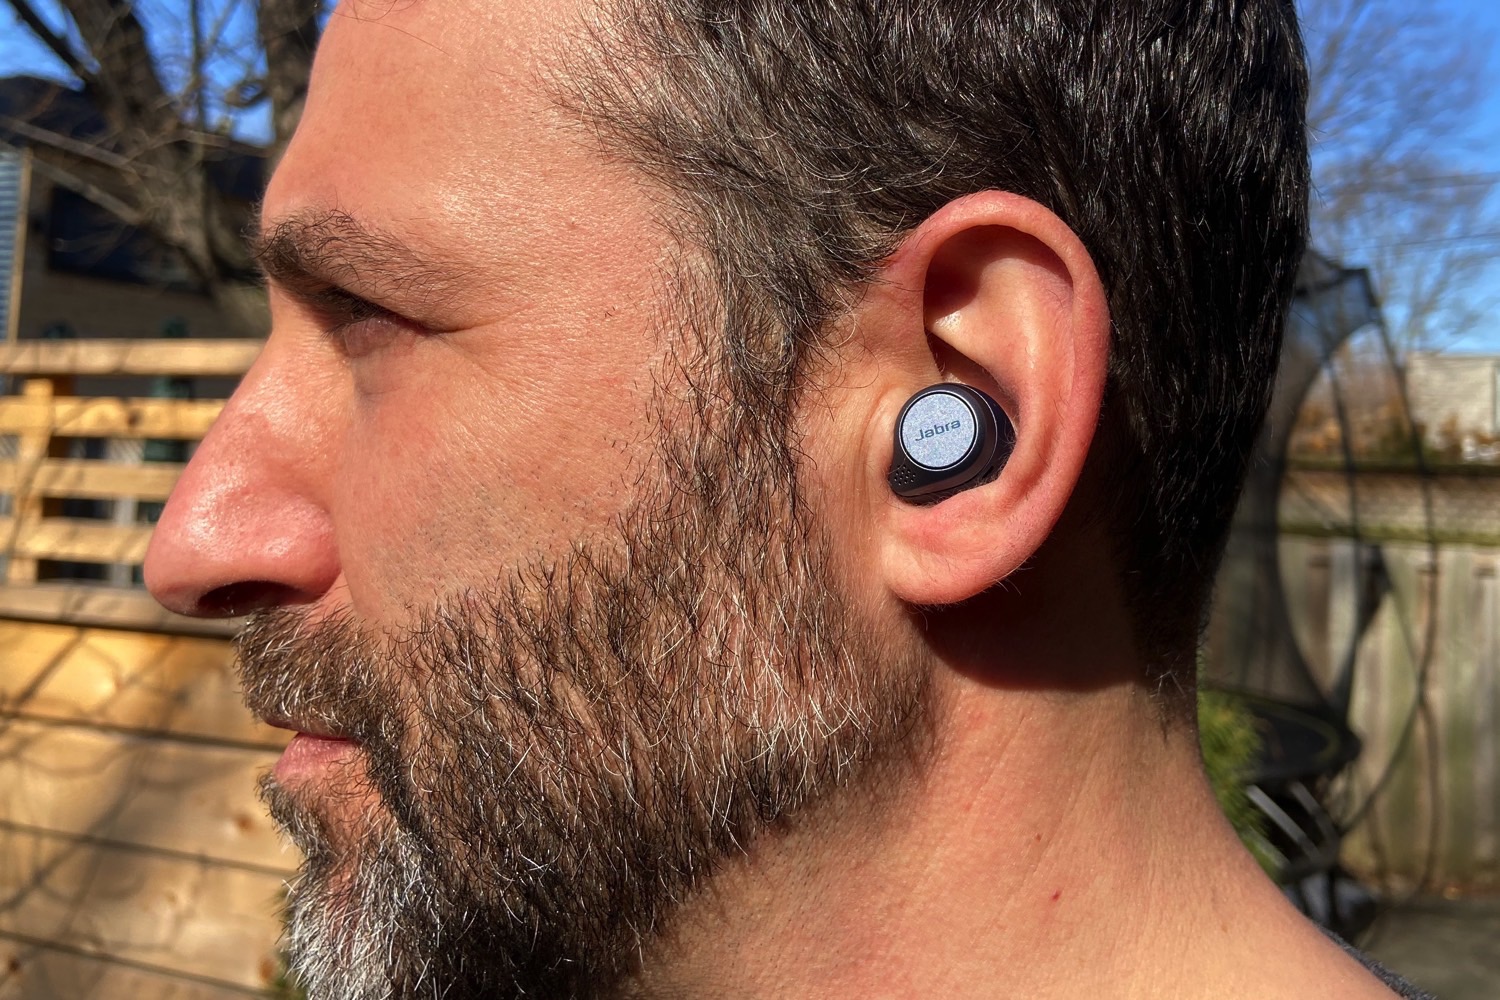  Jabra Elite Active 75t review: The best buds for blocking noise and water